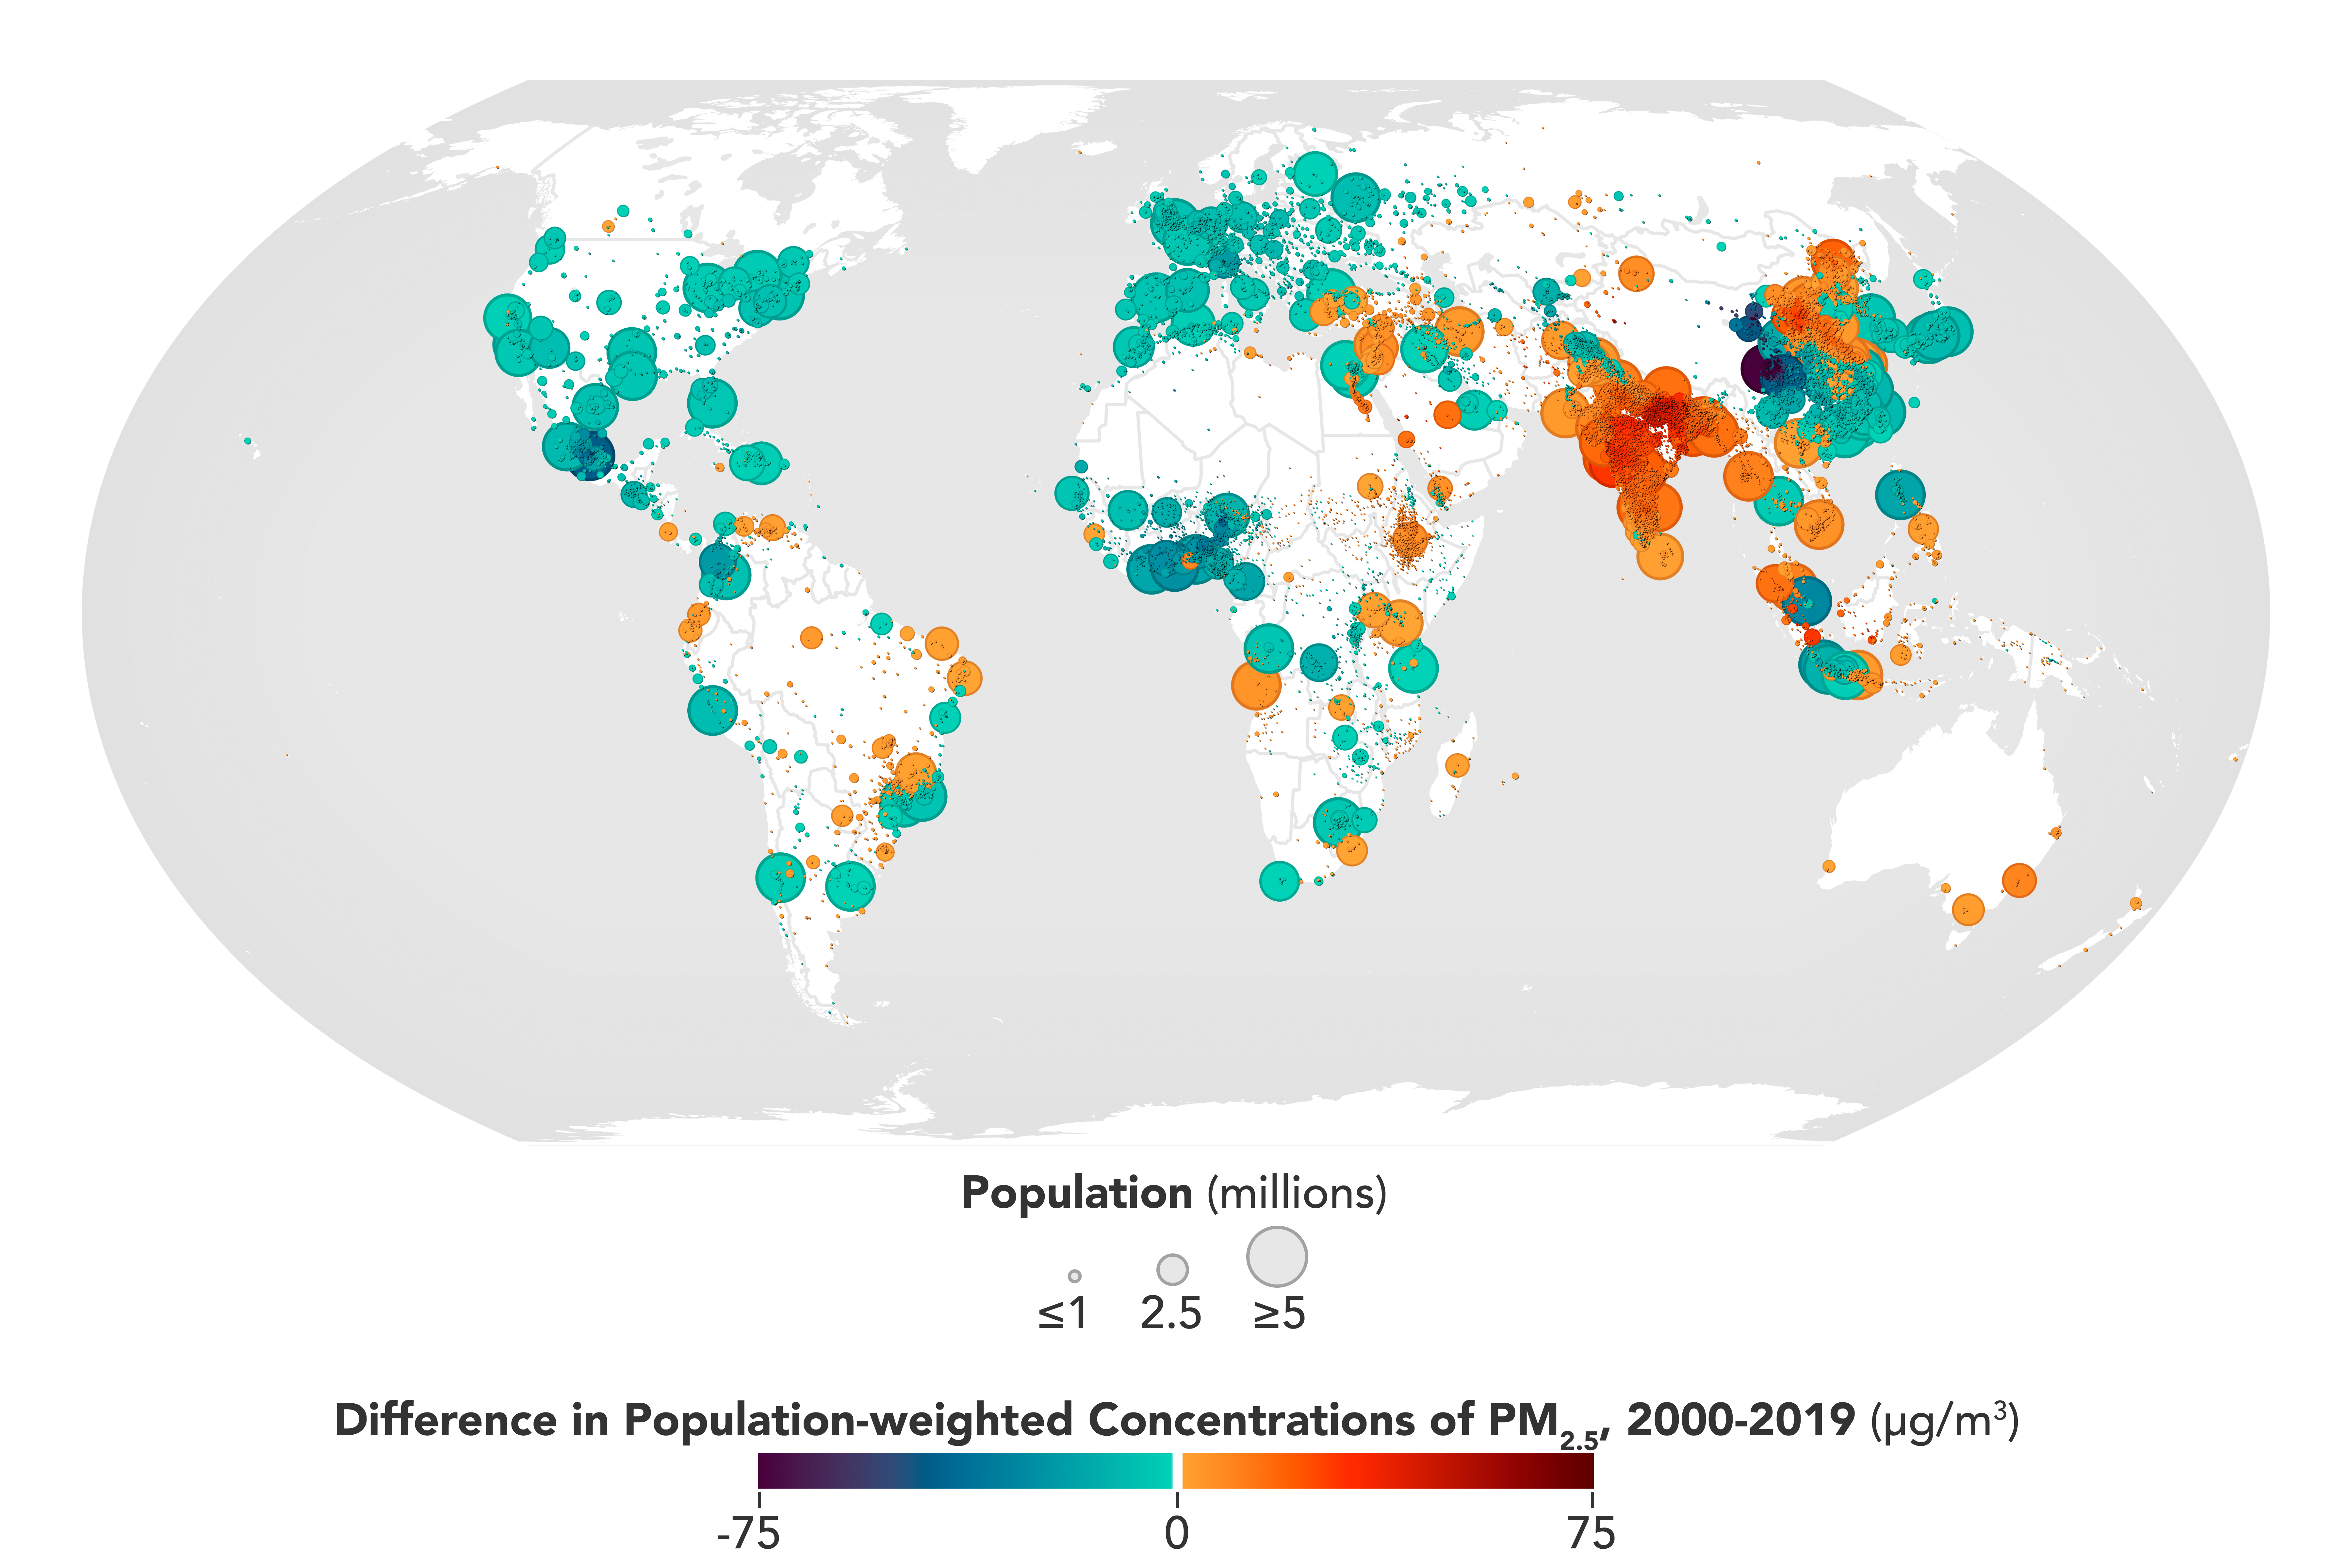 Difference in Population-Weighted Concentrations of PM2.5 2000-2019 (micrograms/cubic meter)